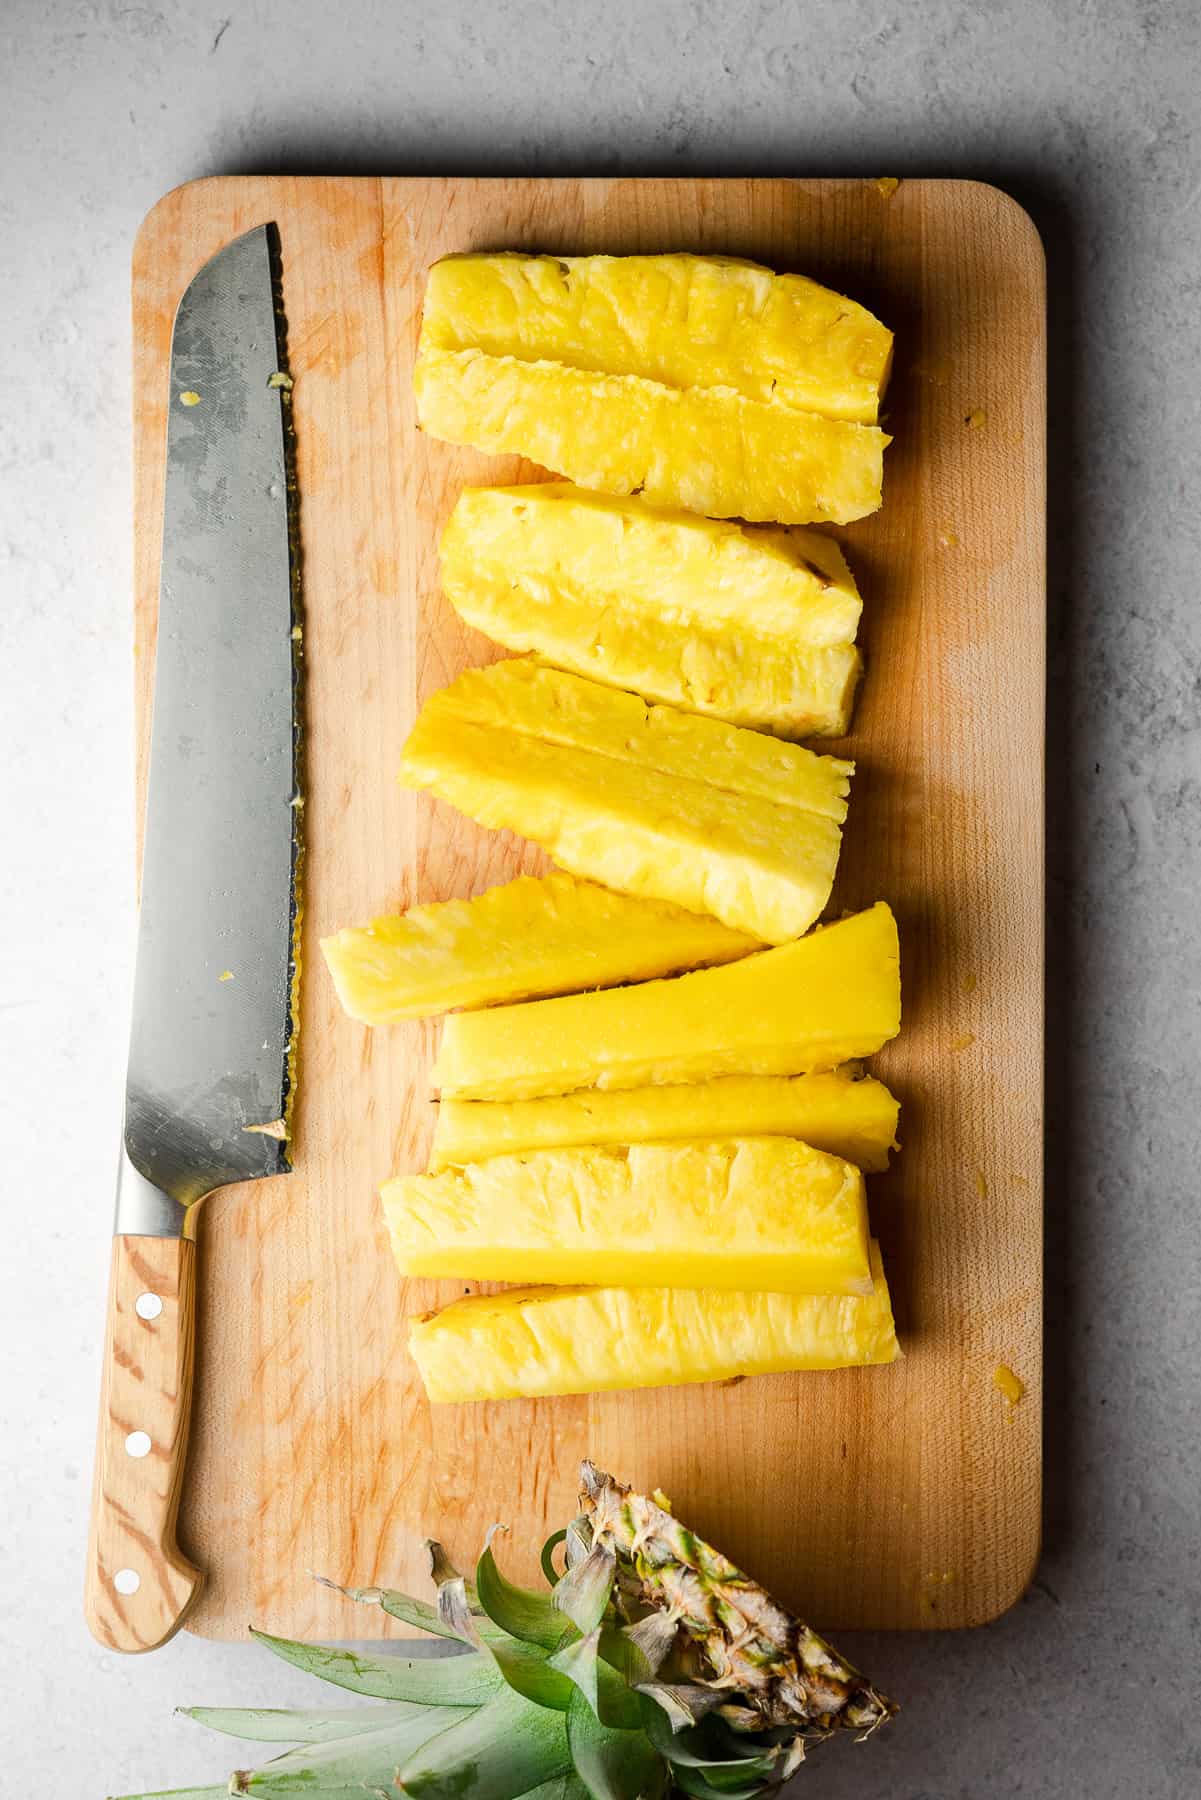 pineapple cut into spears on a cutting board with a bread knife with the pineapple stem